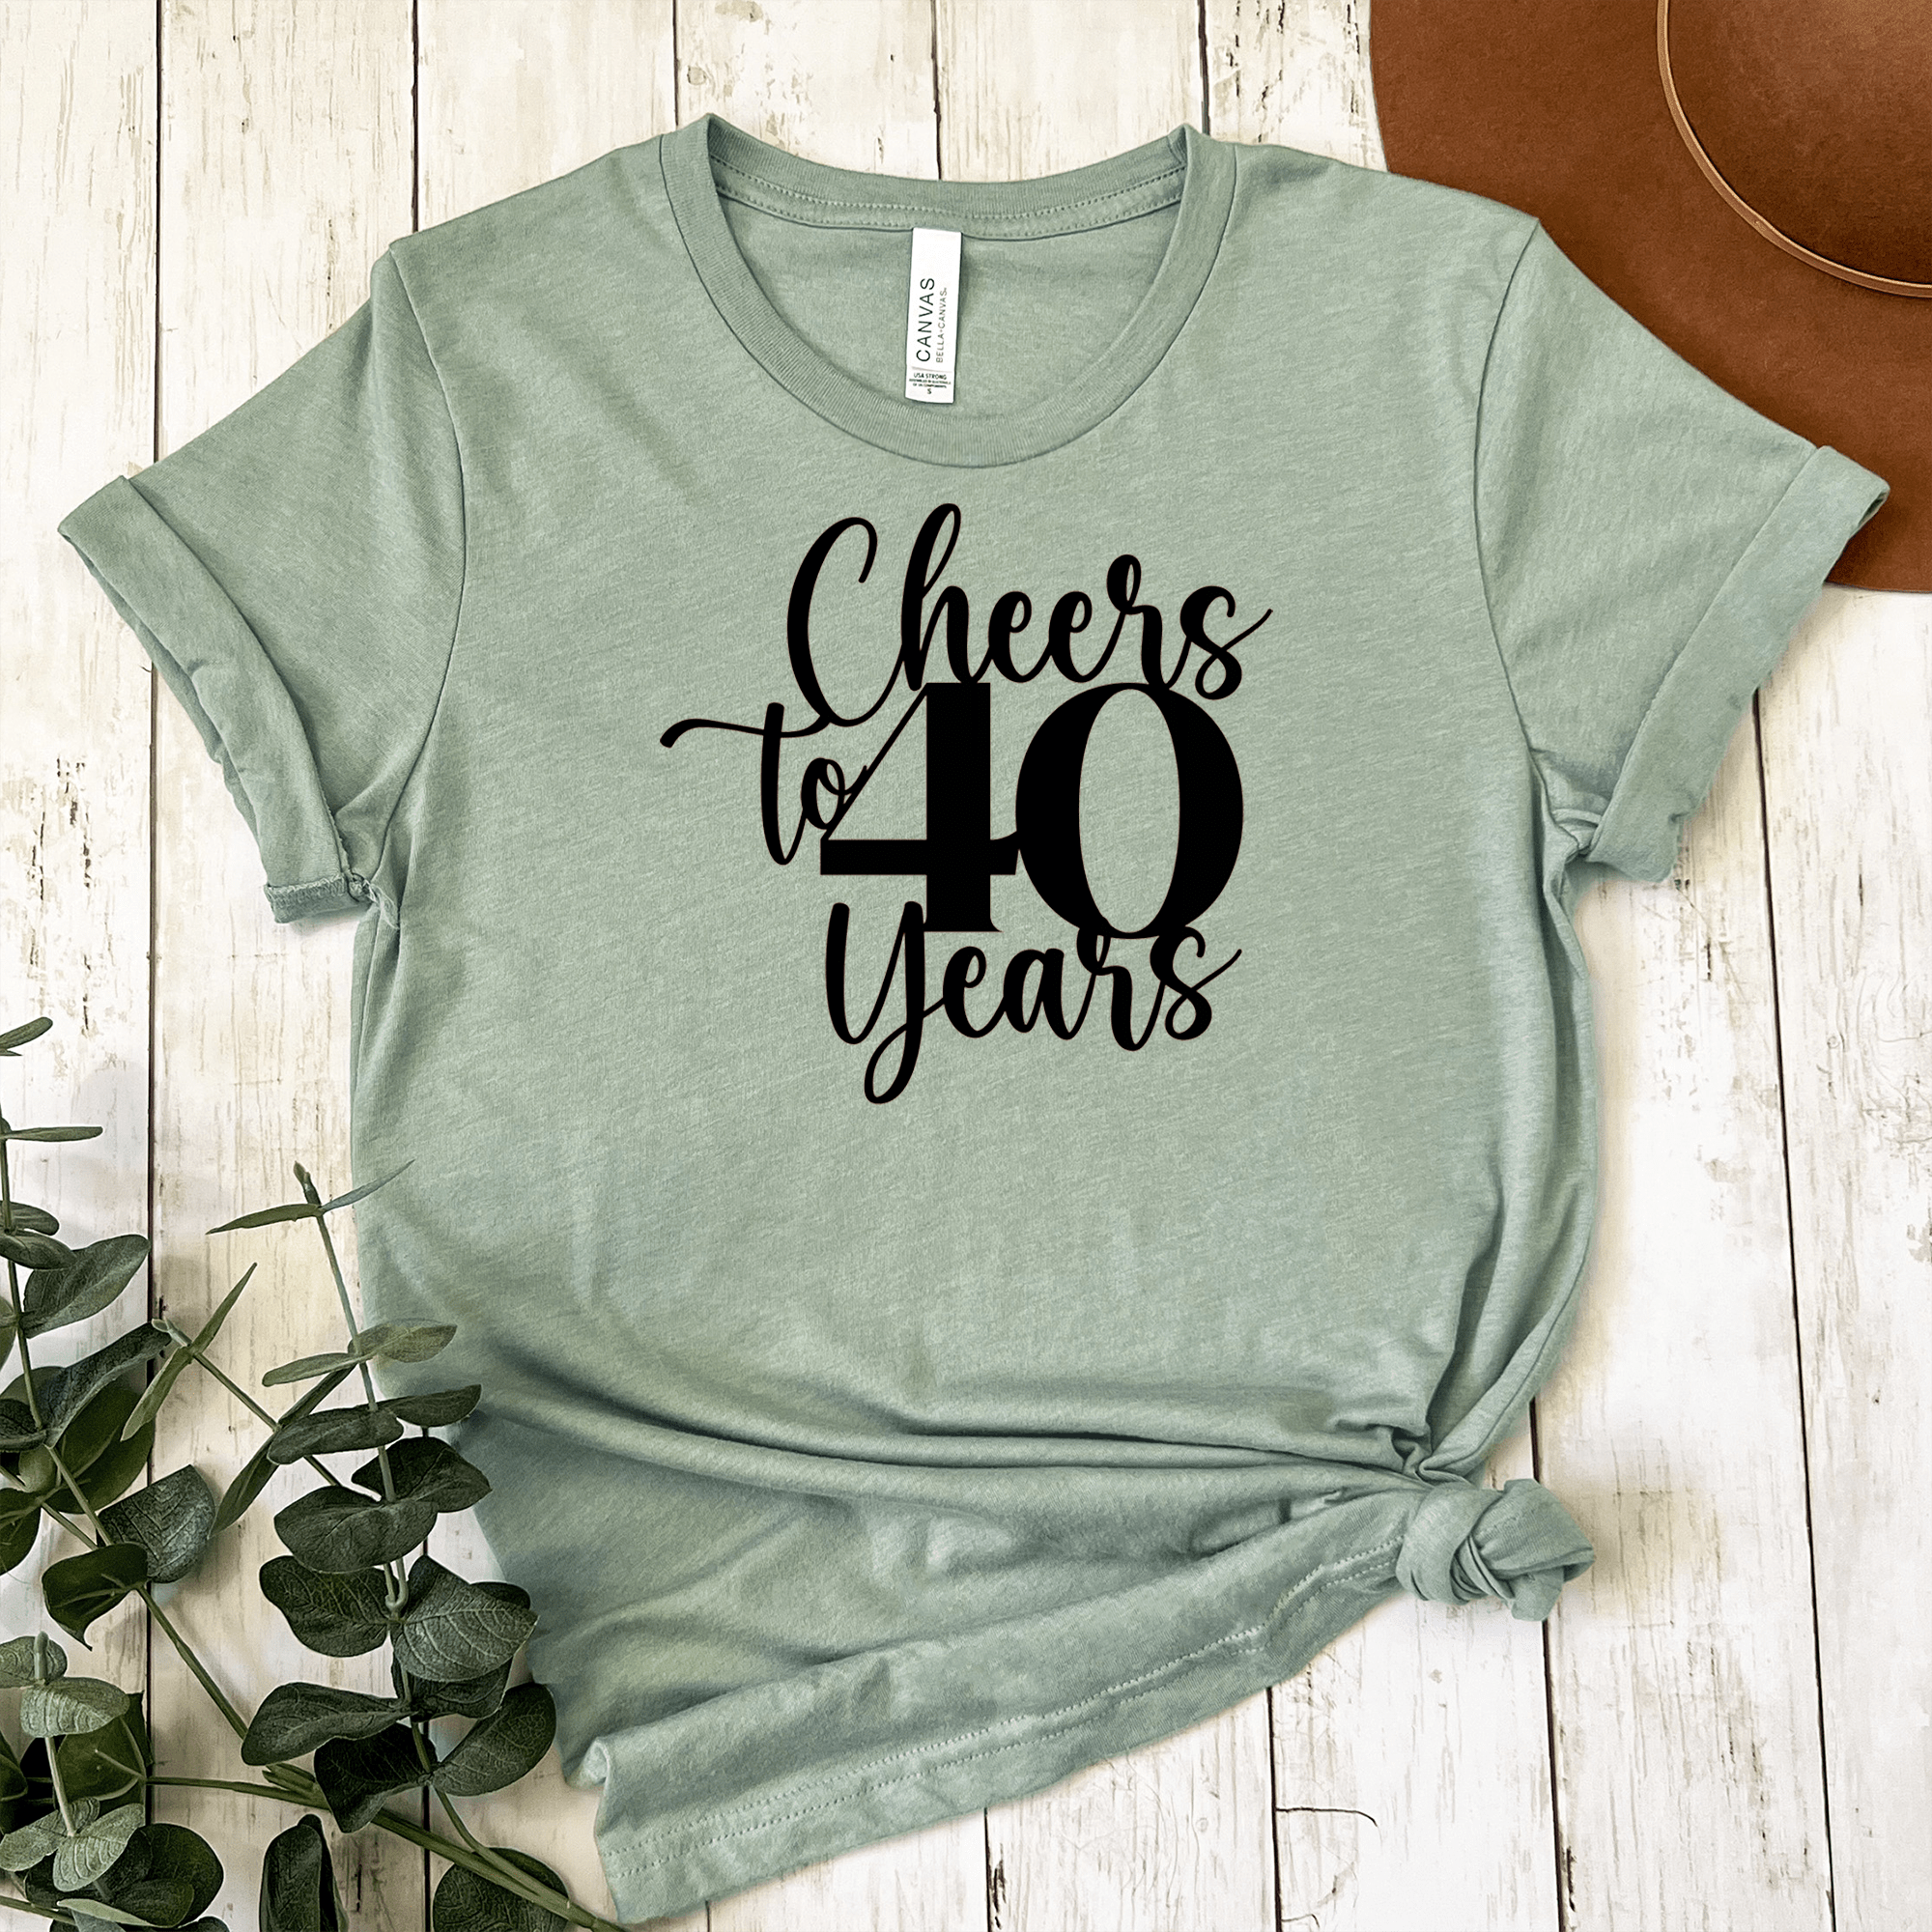 Womens Light Green T Shirt with Cheers-To-Fourty-Years design